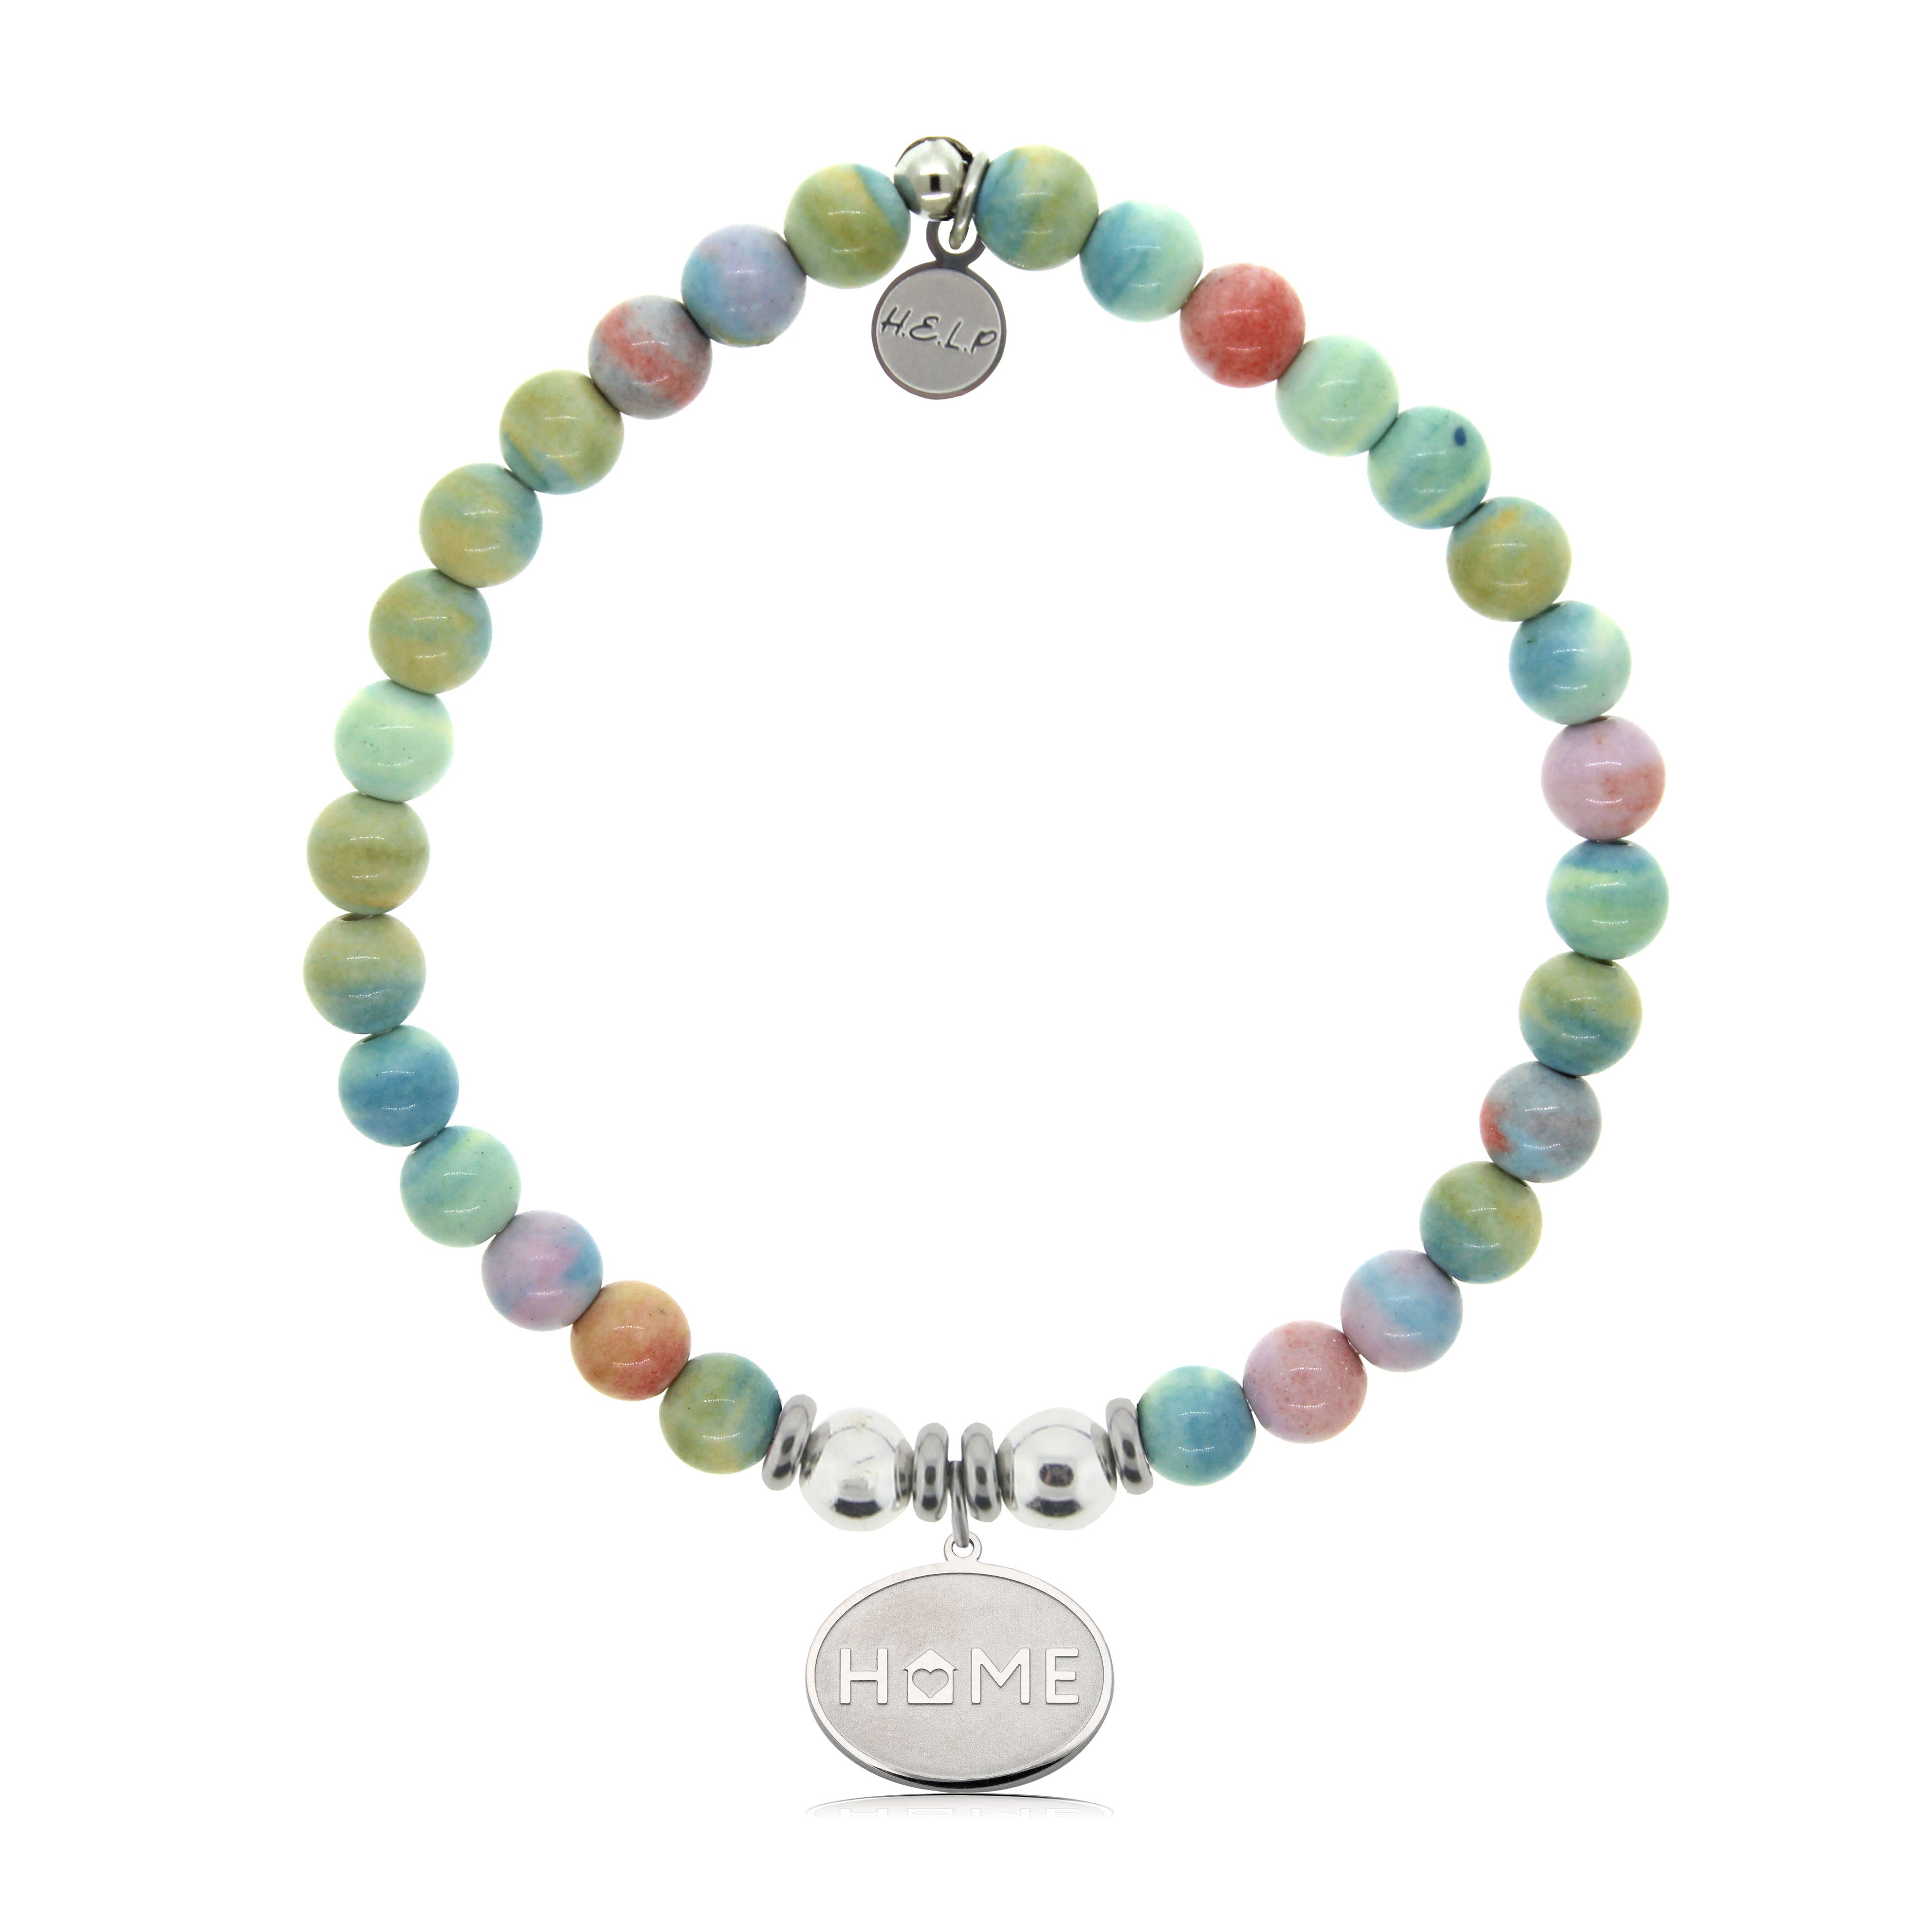 HELP by TJ Home Heart Charm with Pastel Magnesite Charity Bracelet